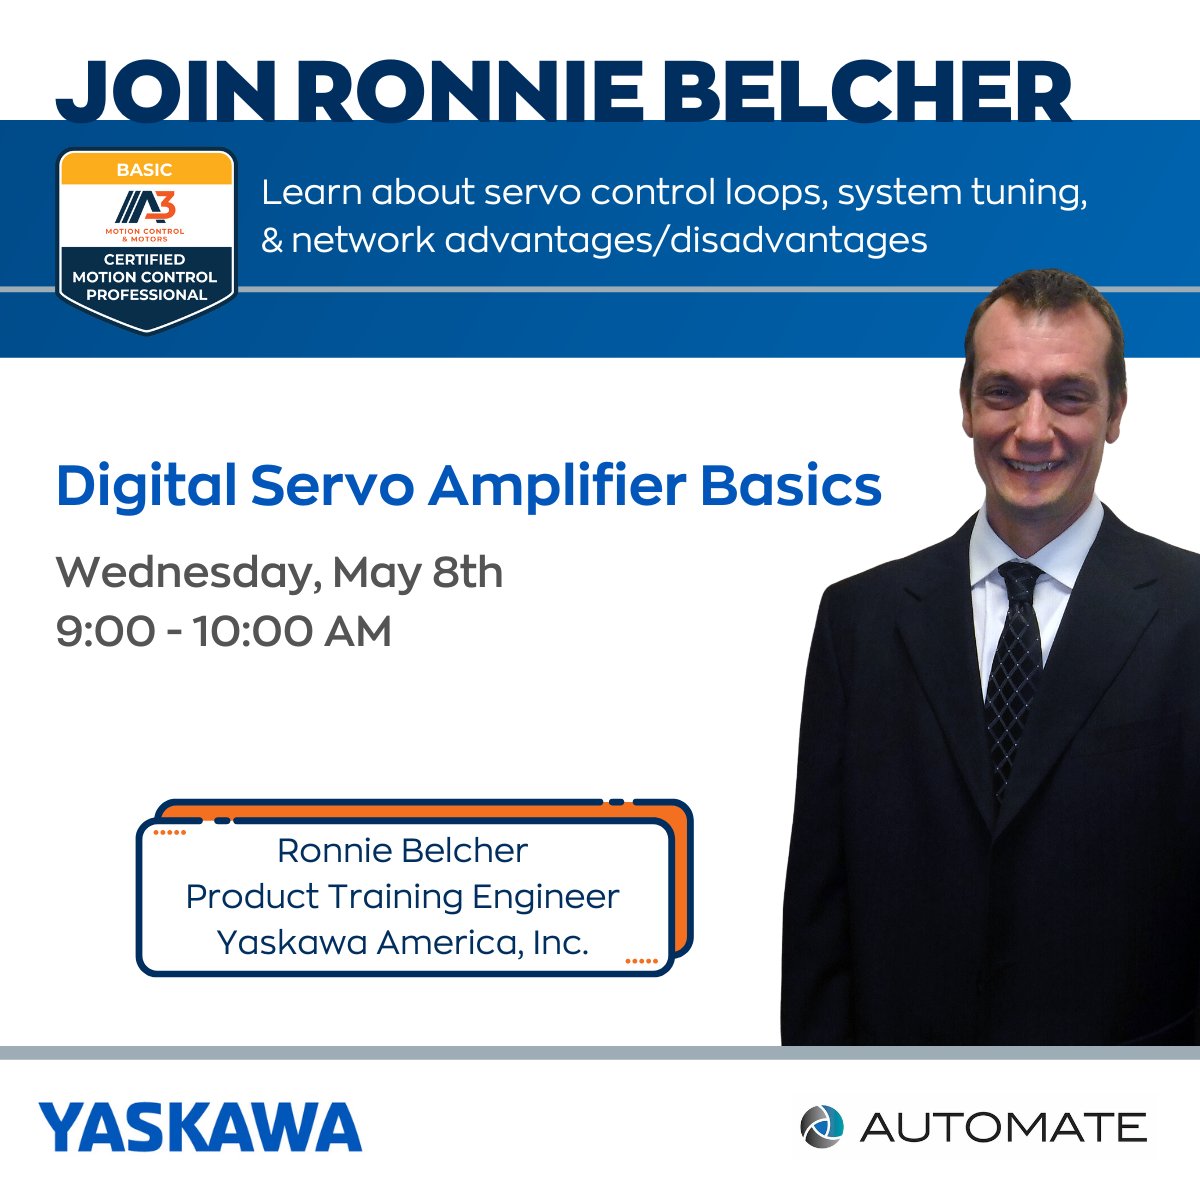 🔎 Explore the basic operation of a digital #servo amplifier with Ronnie Belcher at @AutomateShow. Join us for this Certified Motion Control Professional (CMCP) program 📅 Wednesday, May 8th ⏰ 9-10 AM | Room S405a go.yaskawa-america.com/g54htbjv #Yaskawa #AutomateShow #MotionControl